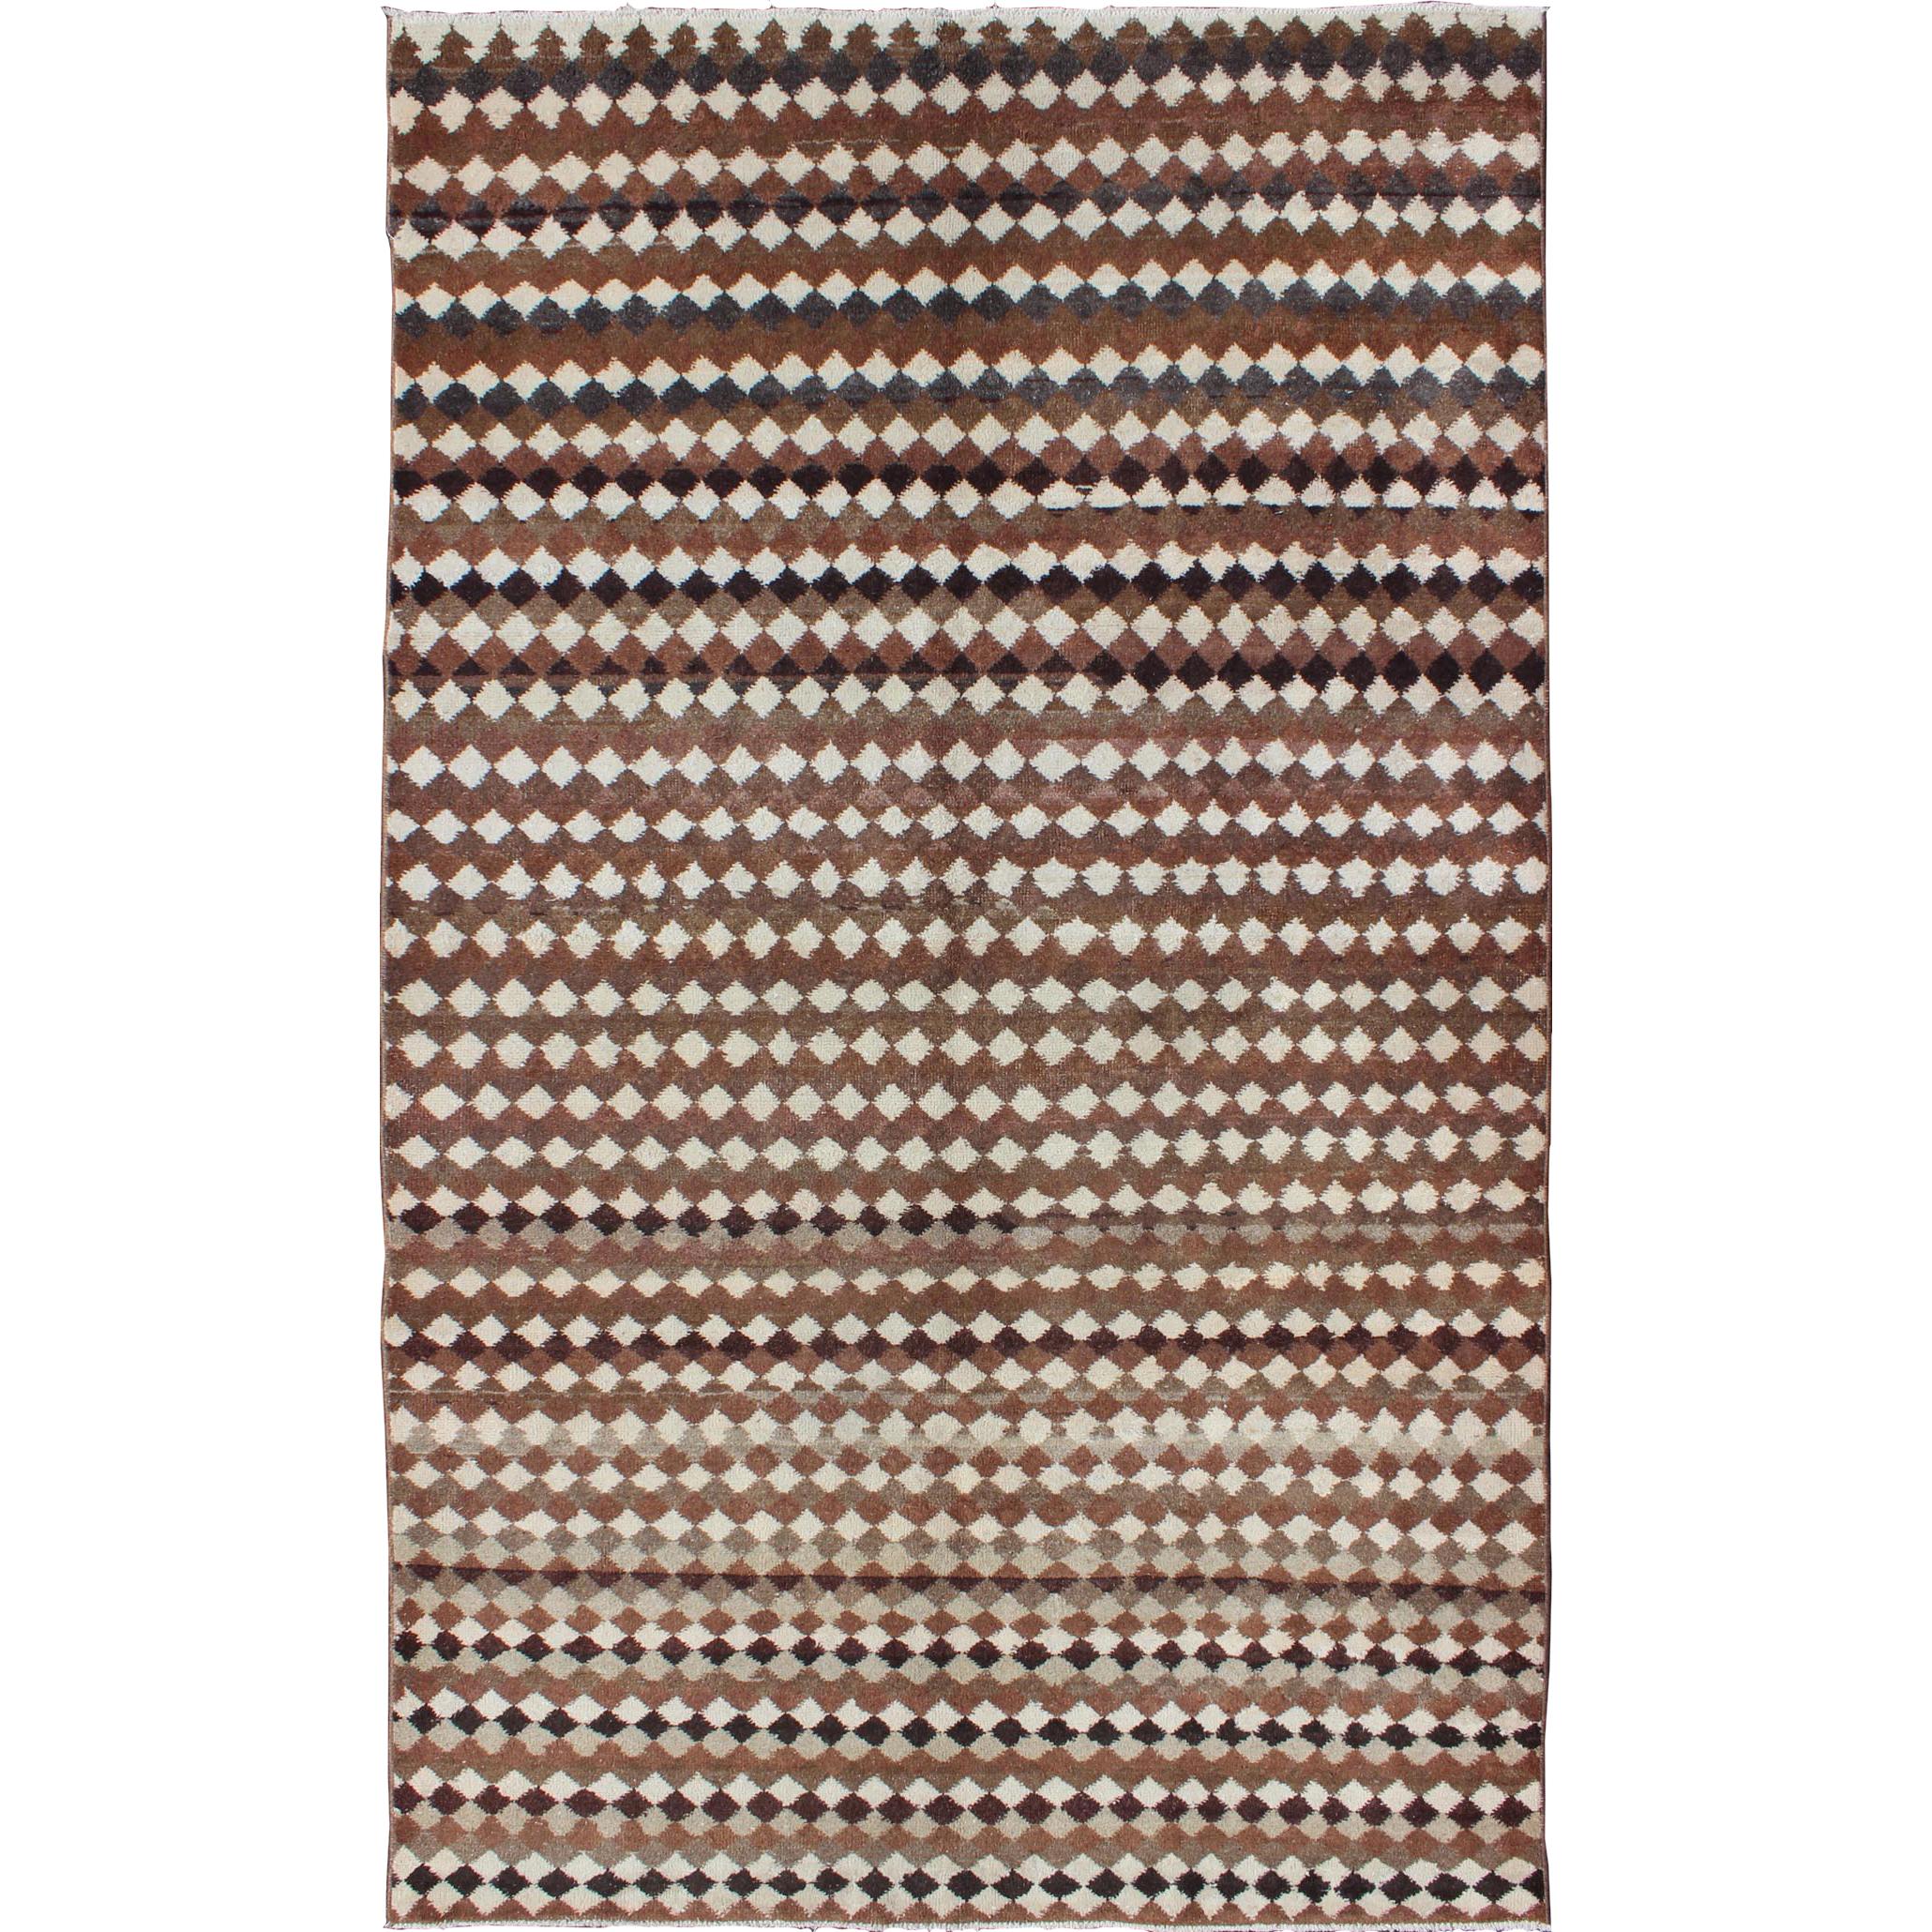 Mid-Century Modern Rug with All-Over Checkerboard Pattern in Multi Brown Tones